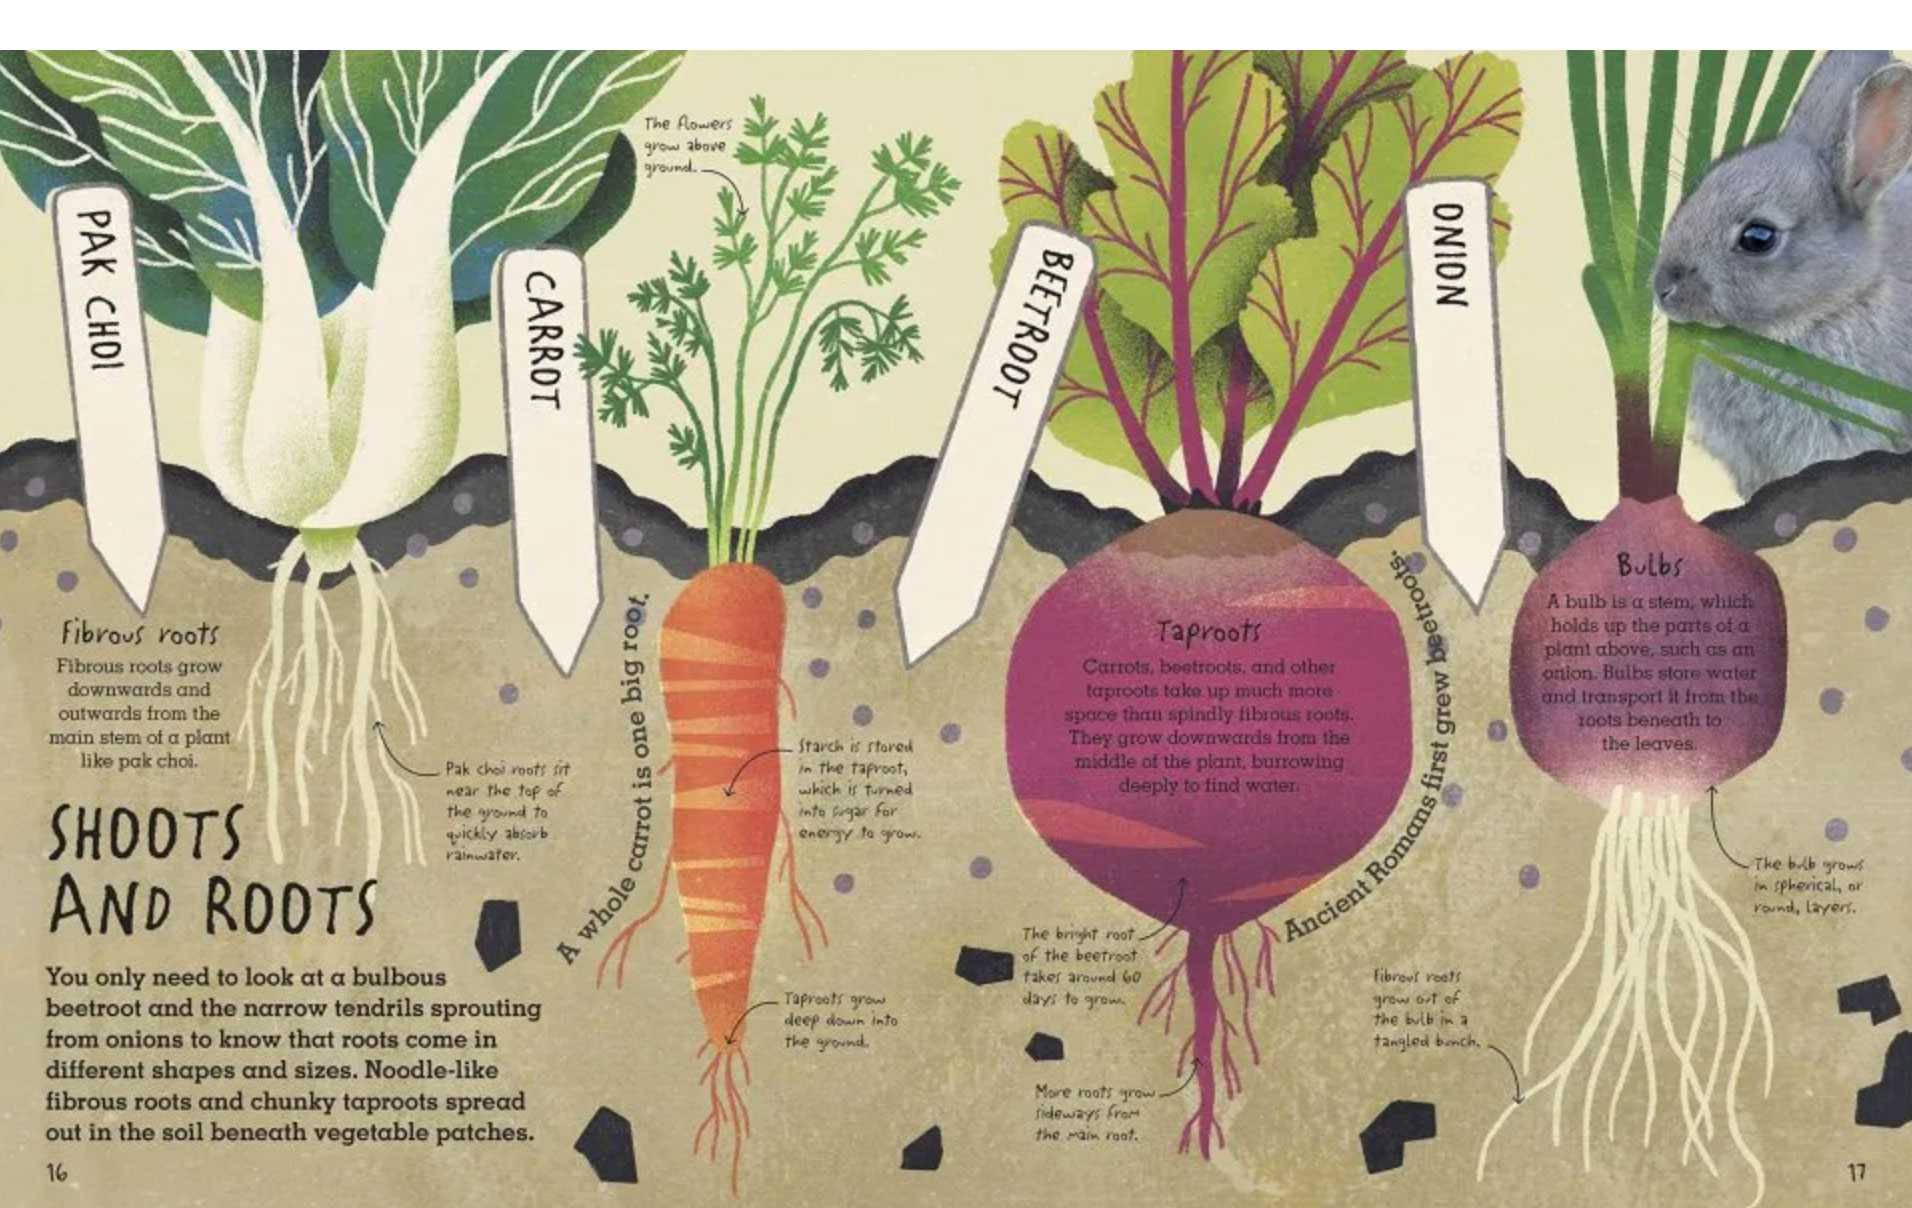 cross-section of planted vegetables